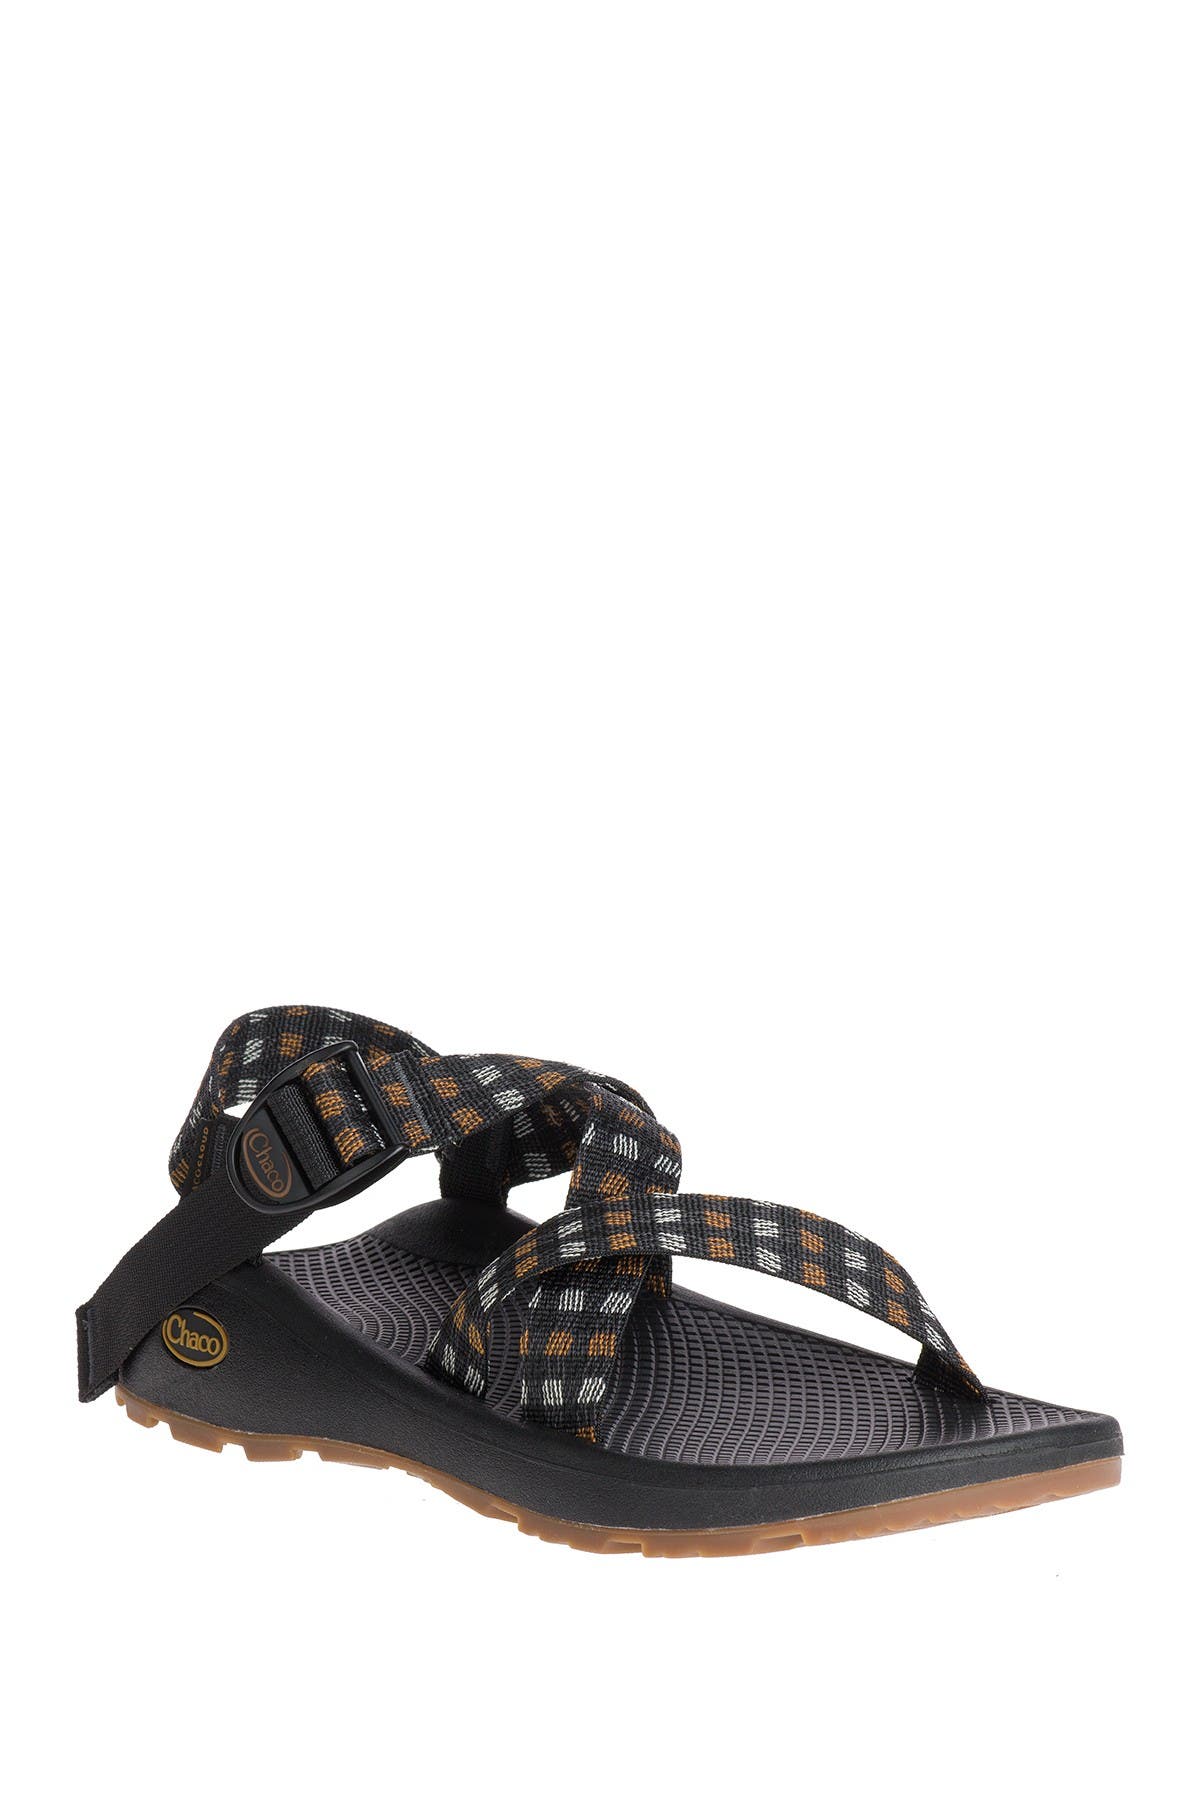 nordstrom chacos